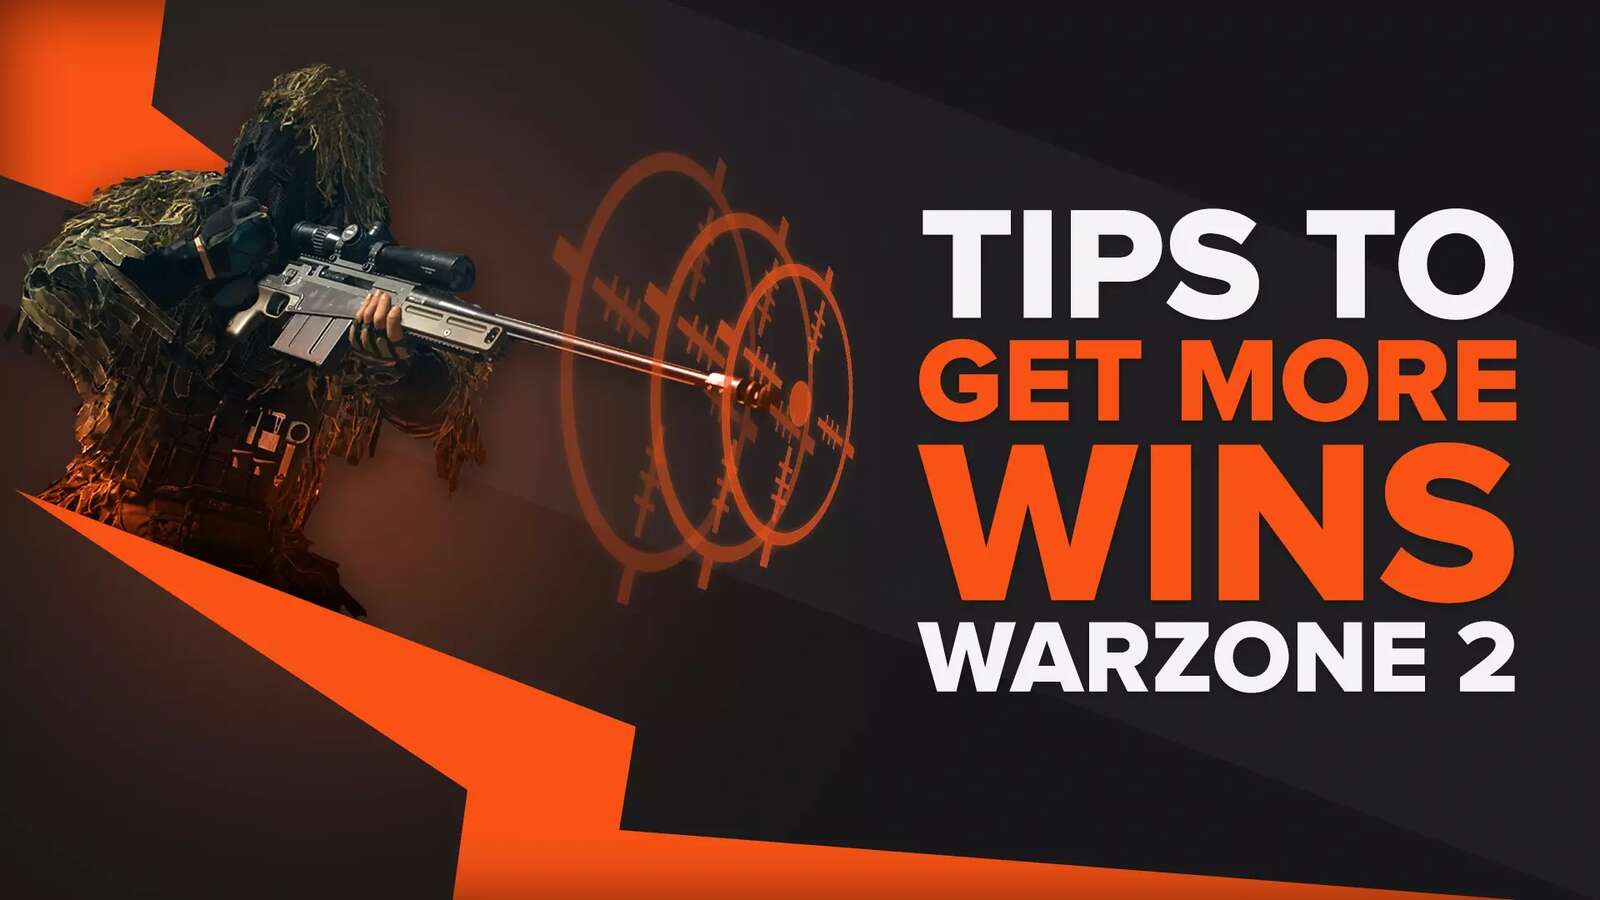 5 Tips To Get More Wins In Warzone 2 [Used by Pros]